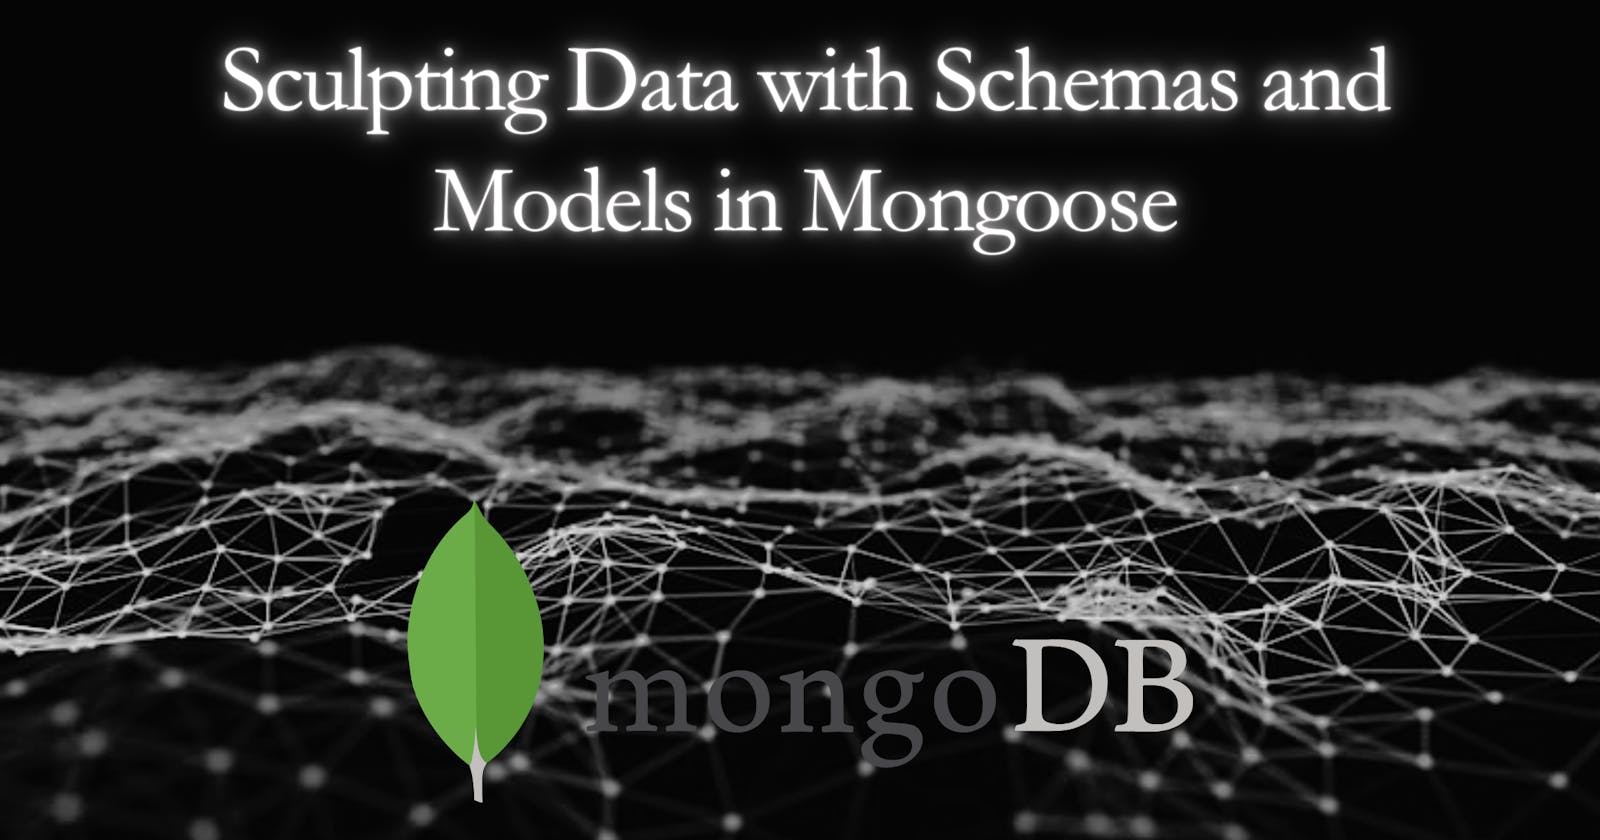 Sculpting Data with Schemas and Models in Mongoose